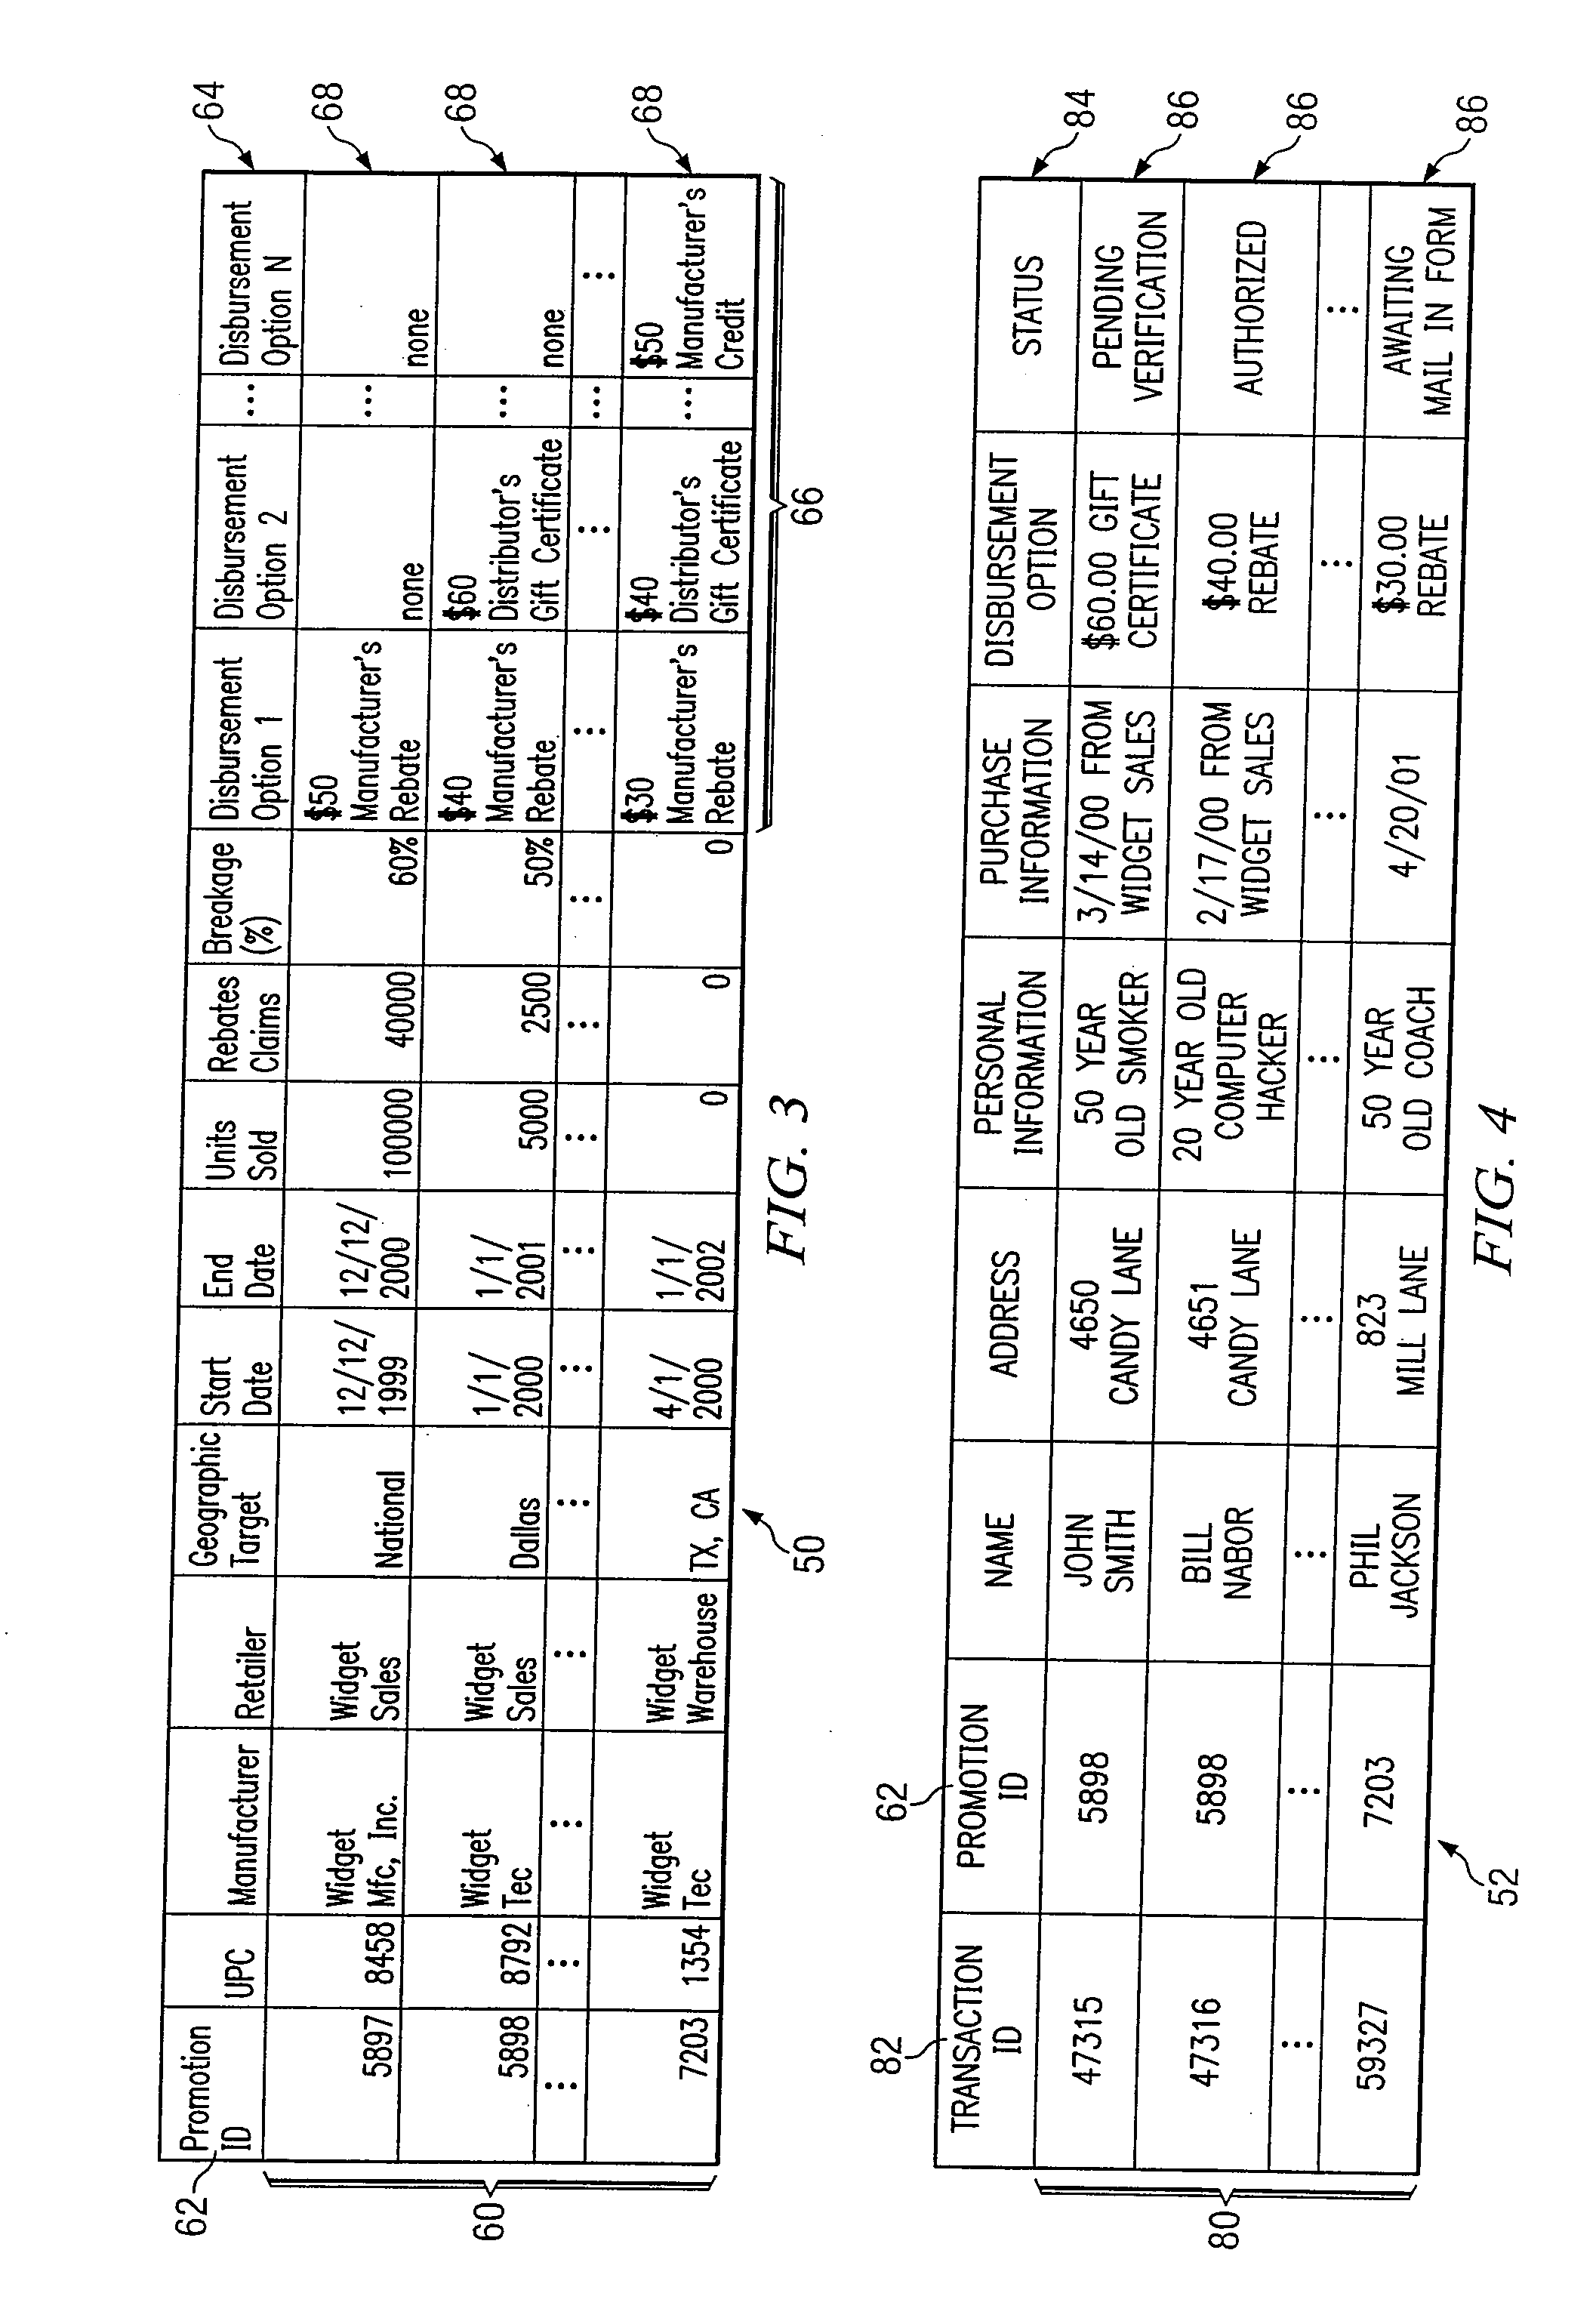 Rebate Processing System and Method Offering Selectable Disbursement Options